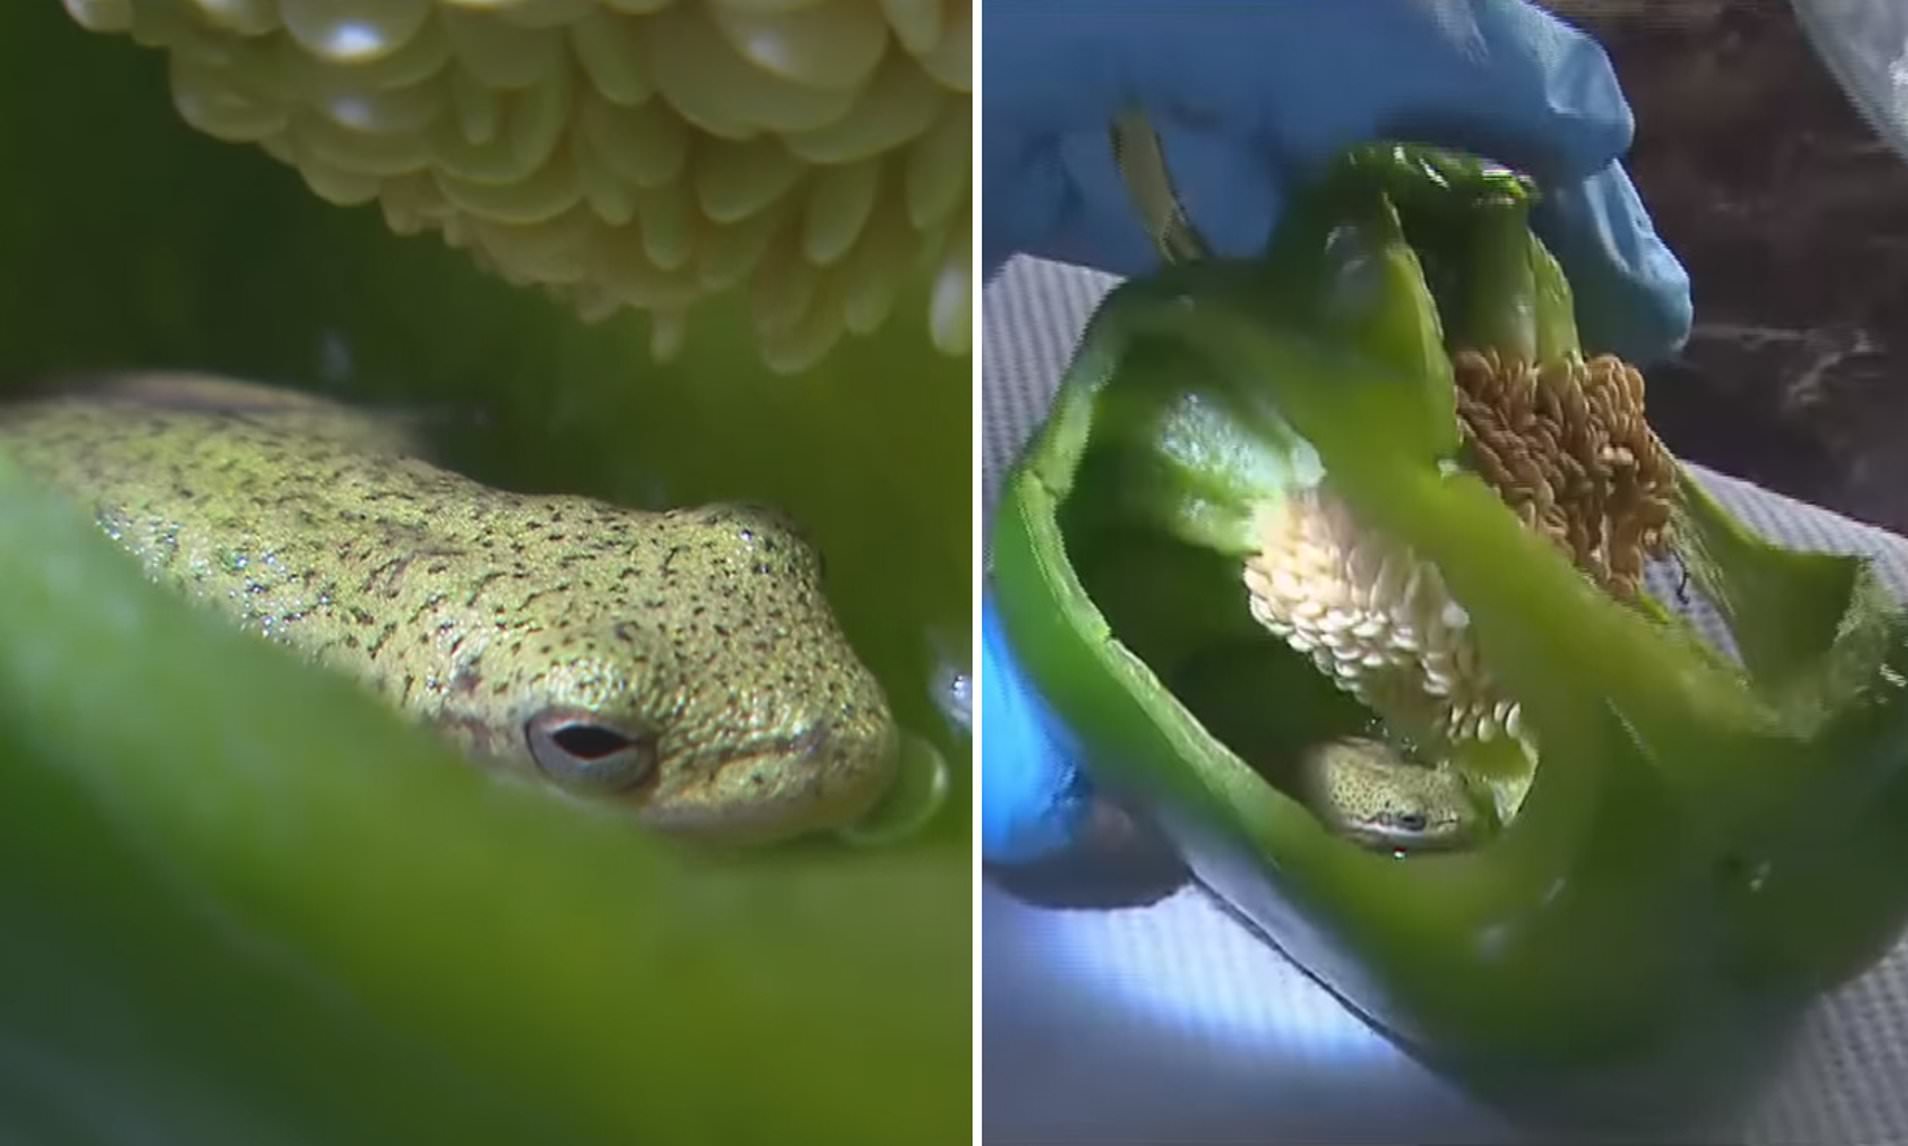 Couple find a live frog INSIDE a whole pepper they bought at their local grocery store - leaving experts mystified as to how